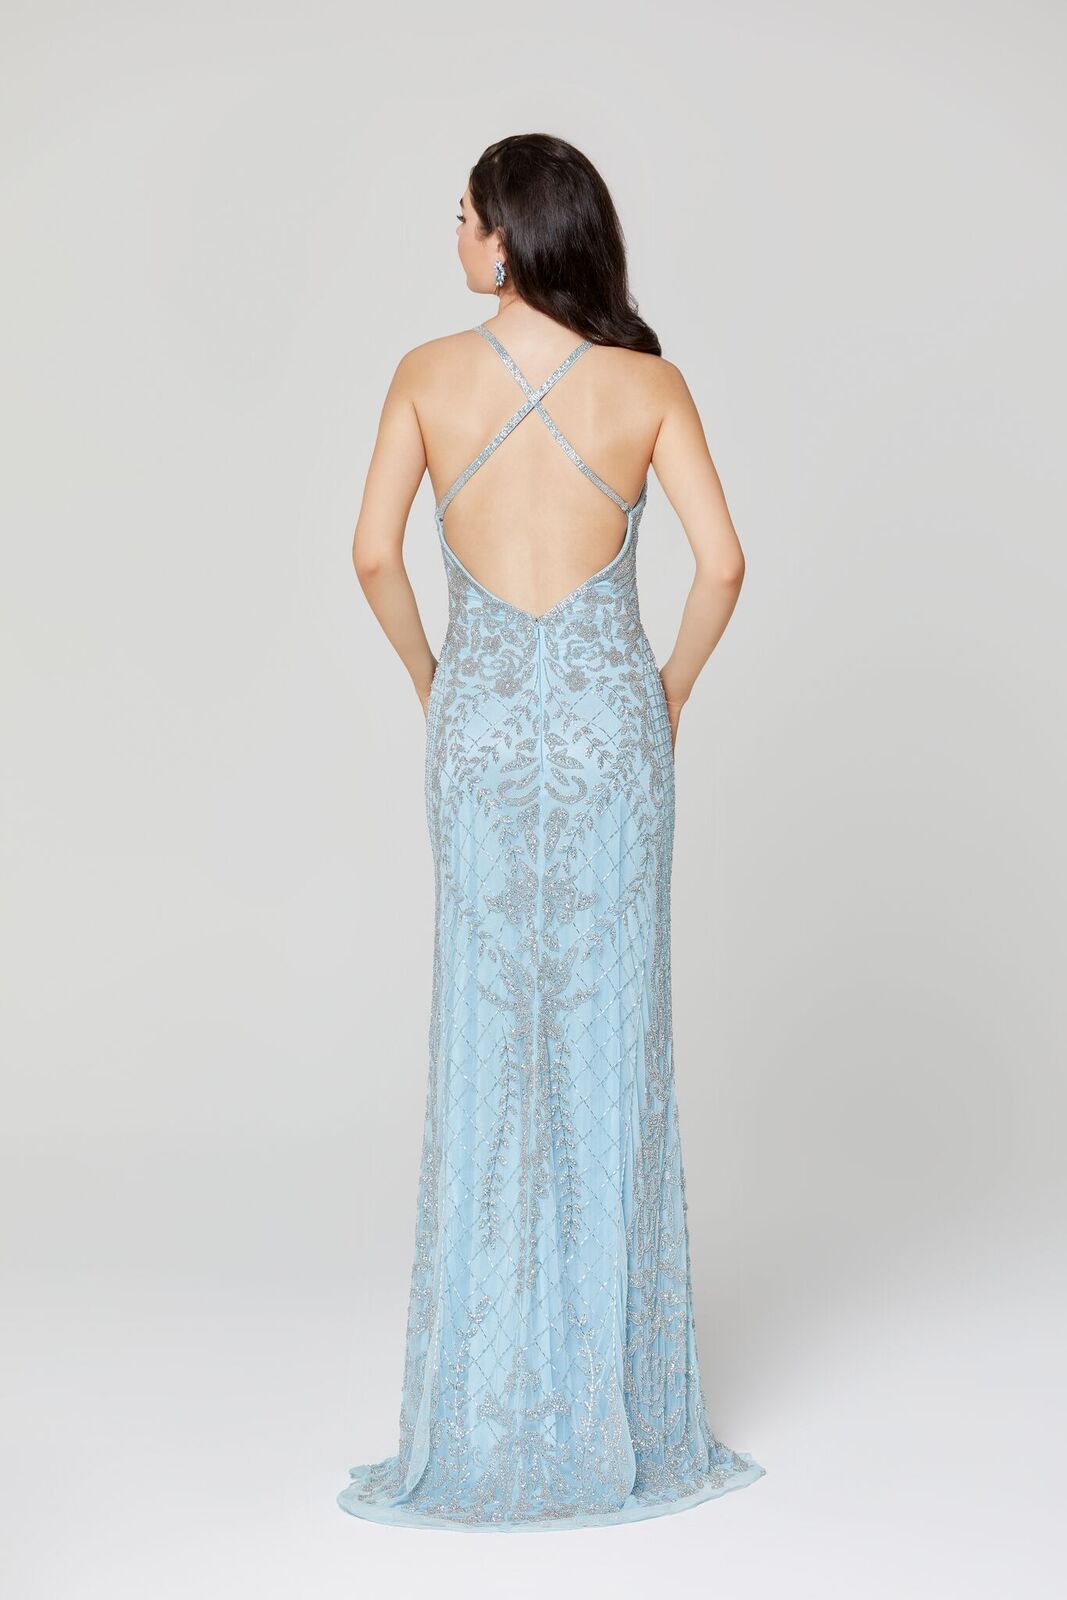 Primavera Couture 3428 is a embellished Prom Dress, Pageant Gown, Wedding Dress & Formal Evening Wear gown. This Gown Features a v neckline with spaghetti straps that criss cross in the open back pageant gown. 